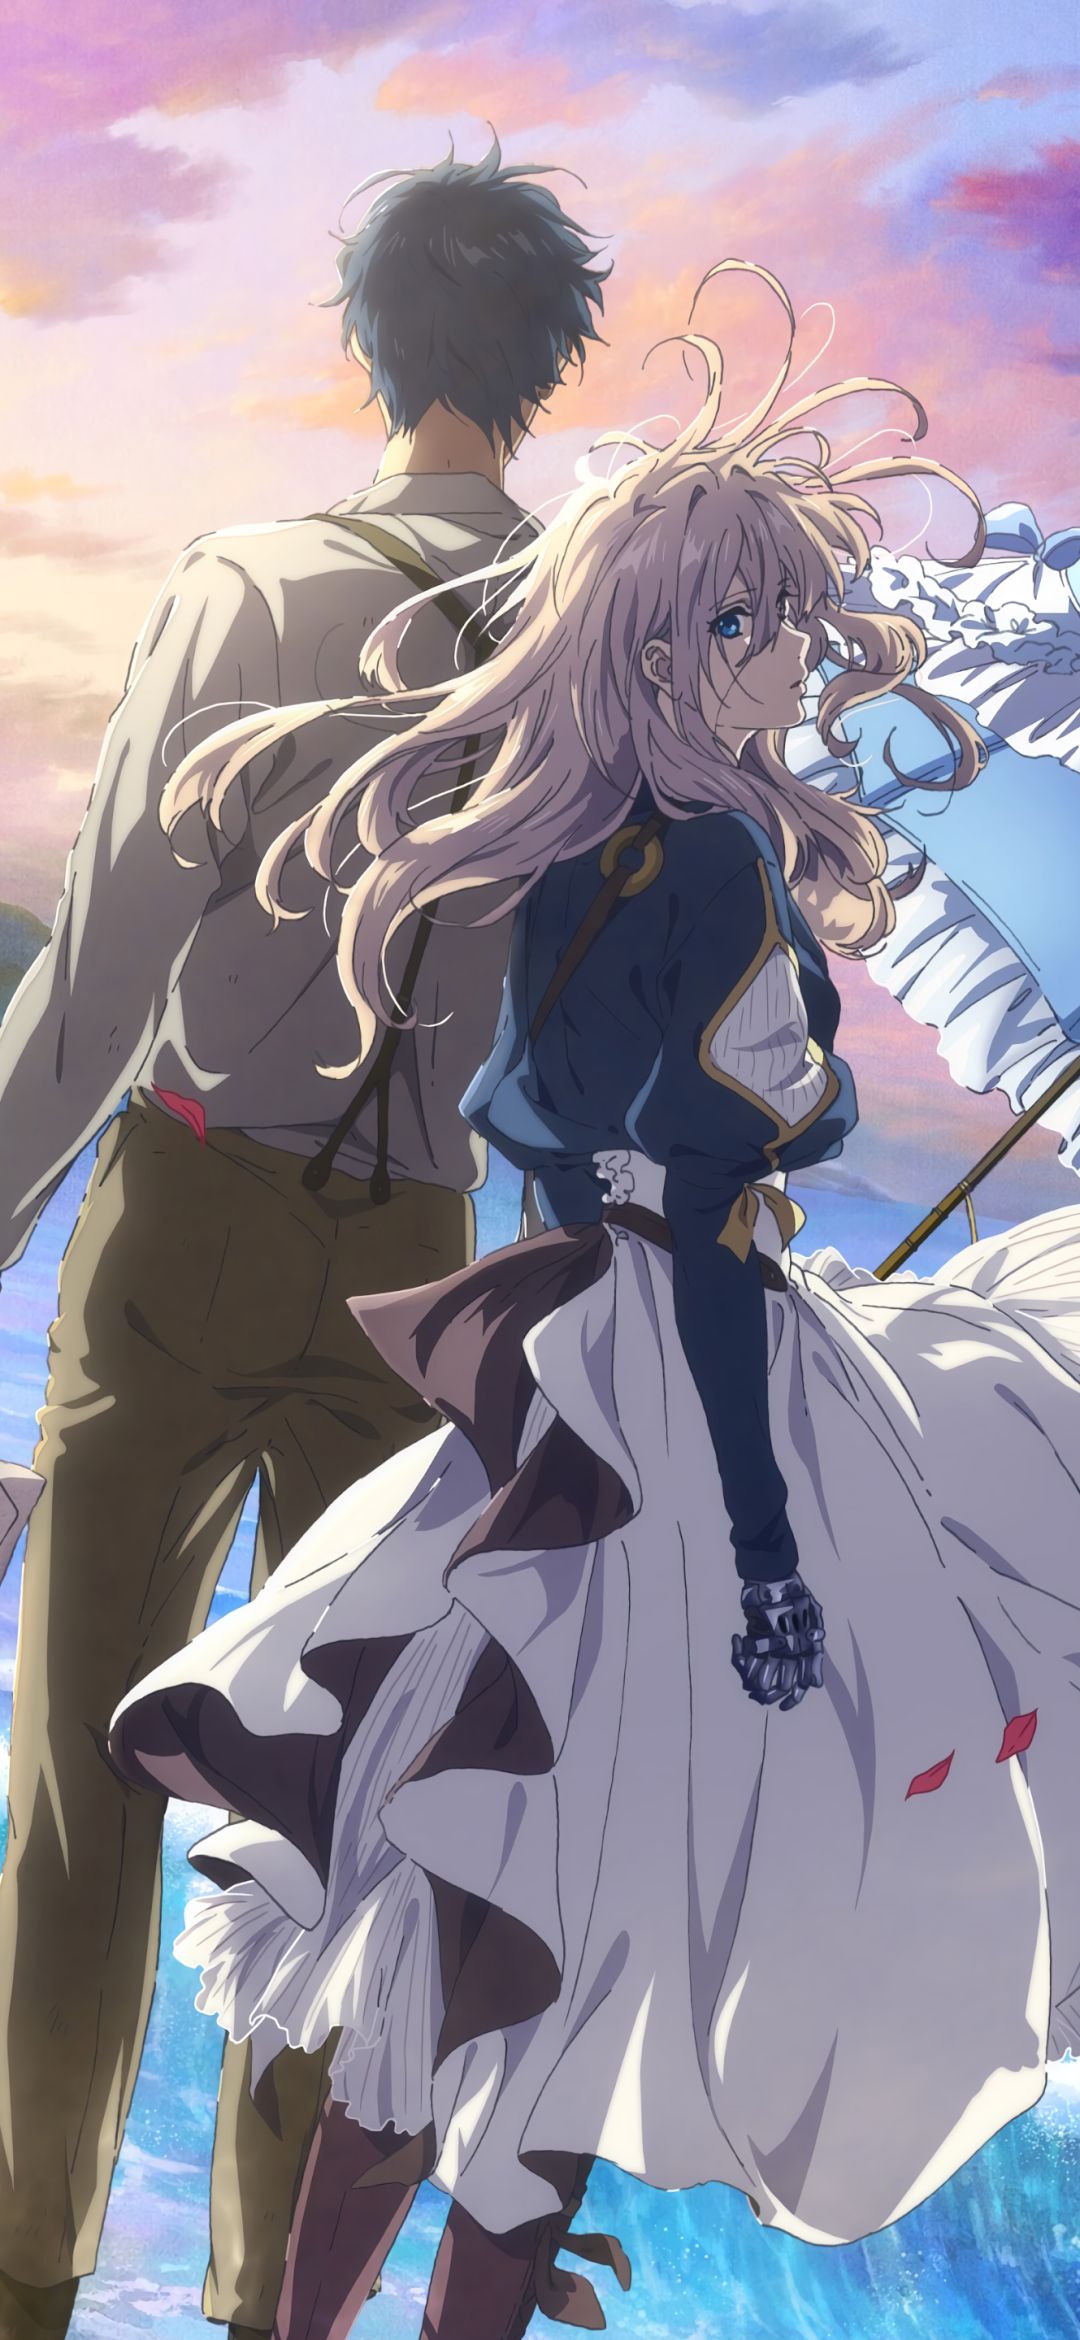 Amazon.com: XIANNA Violet Evergarden Anime Poster (20) Poster Decorative  Painting Canvas Wall Art Living Room Posters Bedroom Painting  08x12inch(20x30cm): Posters & Prints